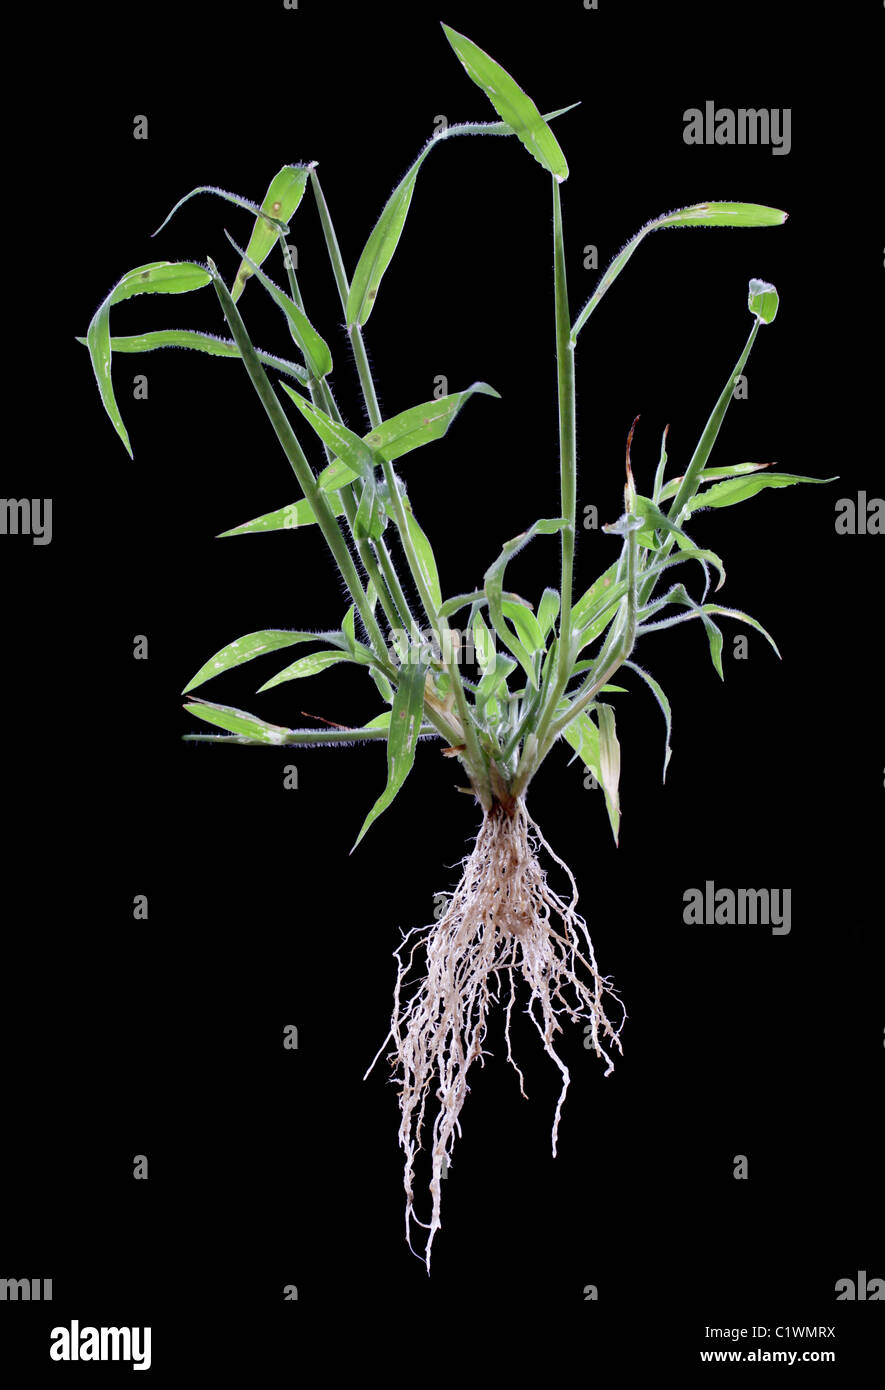 A crabgrass plant, showing fibrous roots, stems, and blades. Stock Photo